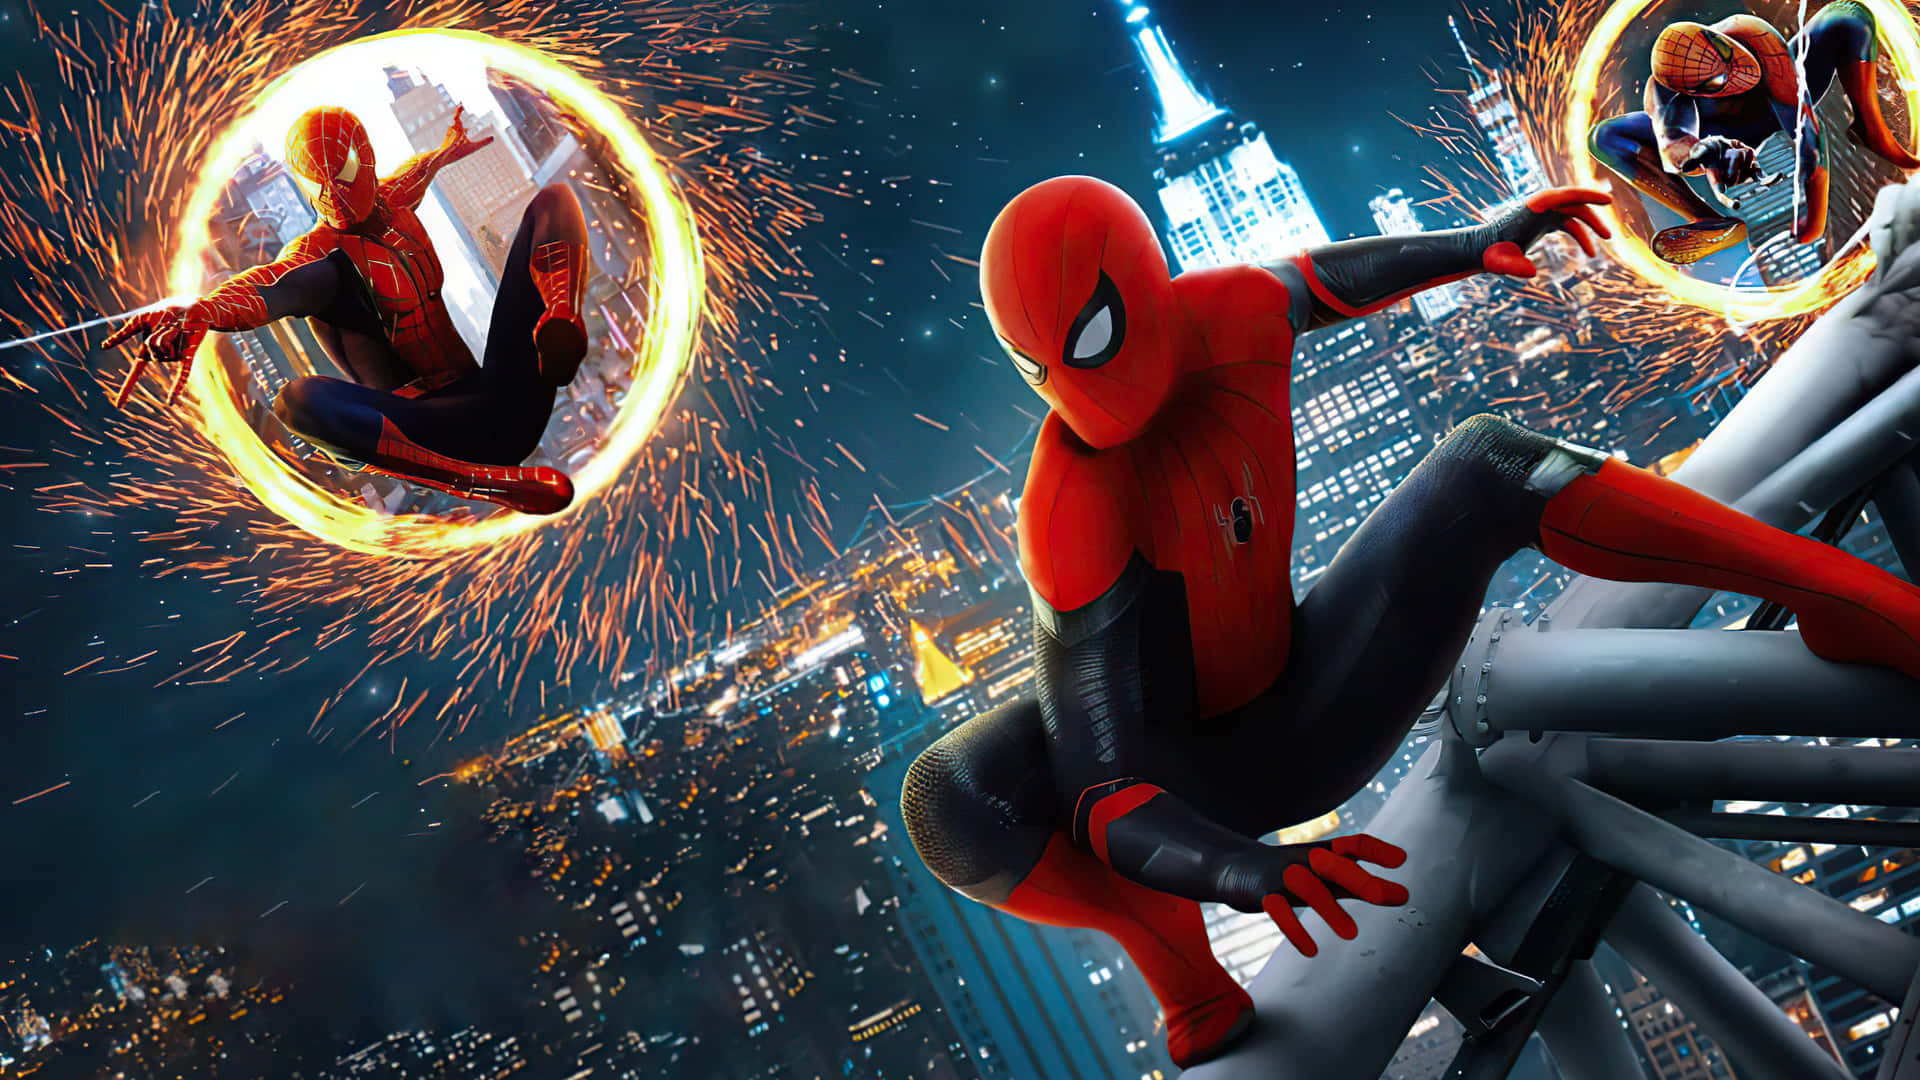 Join Spider-Man on an Epic Adventure in No Way Home